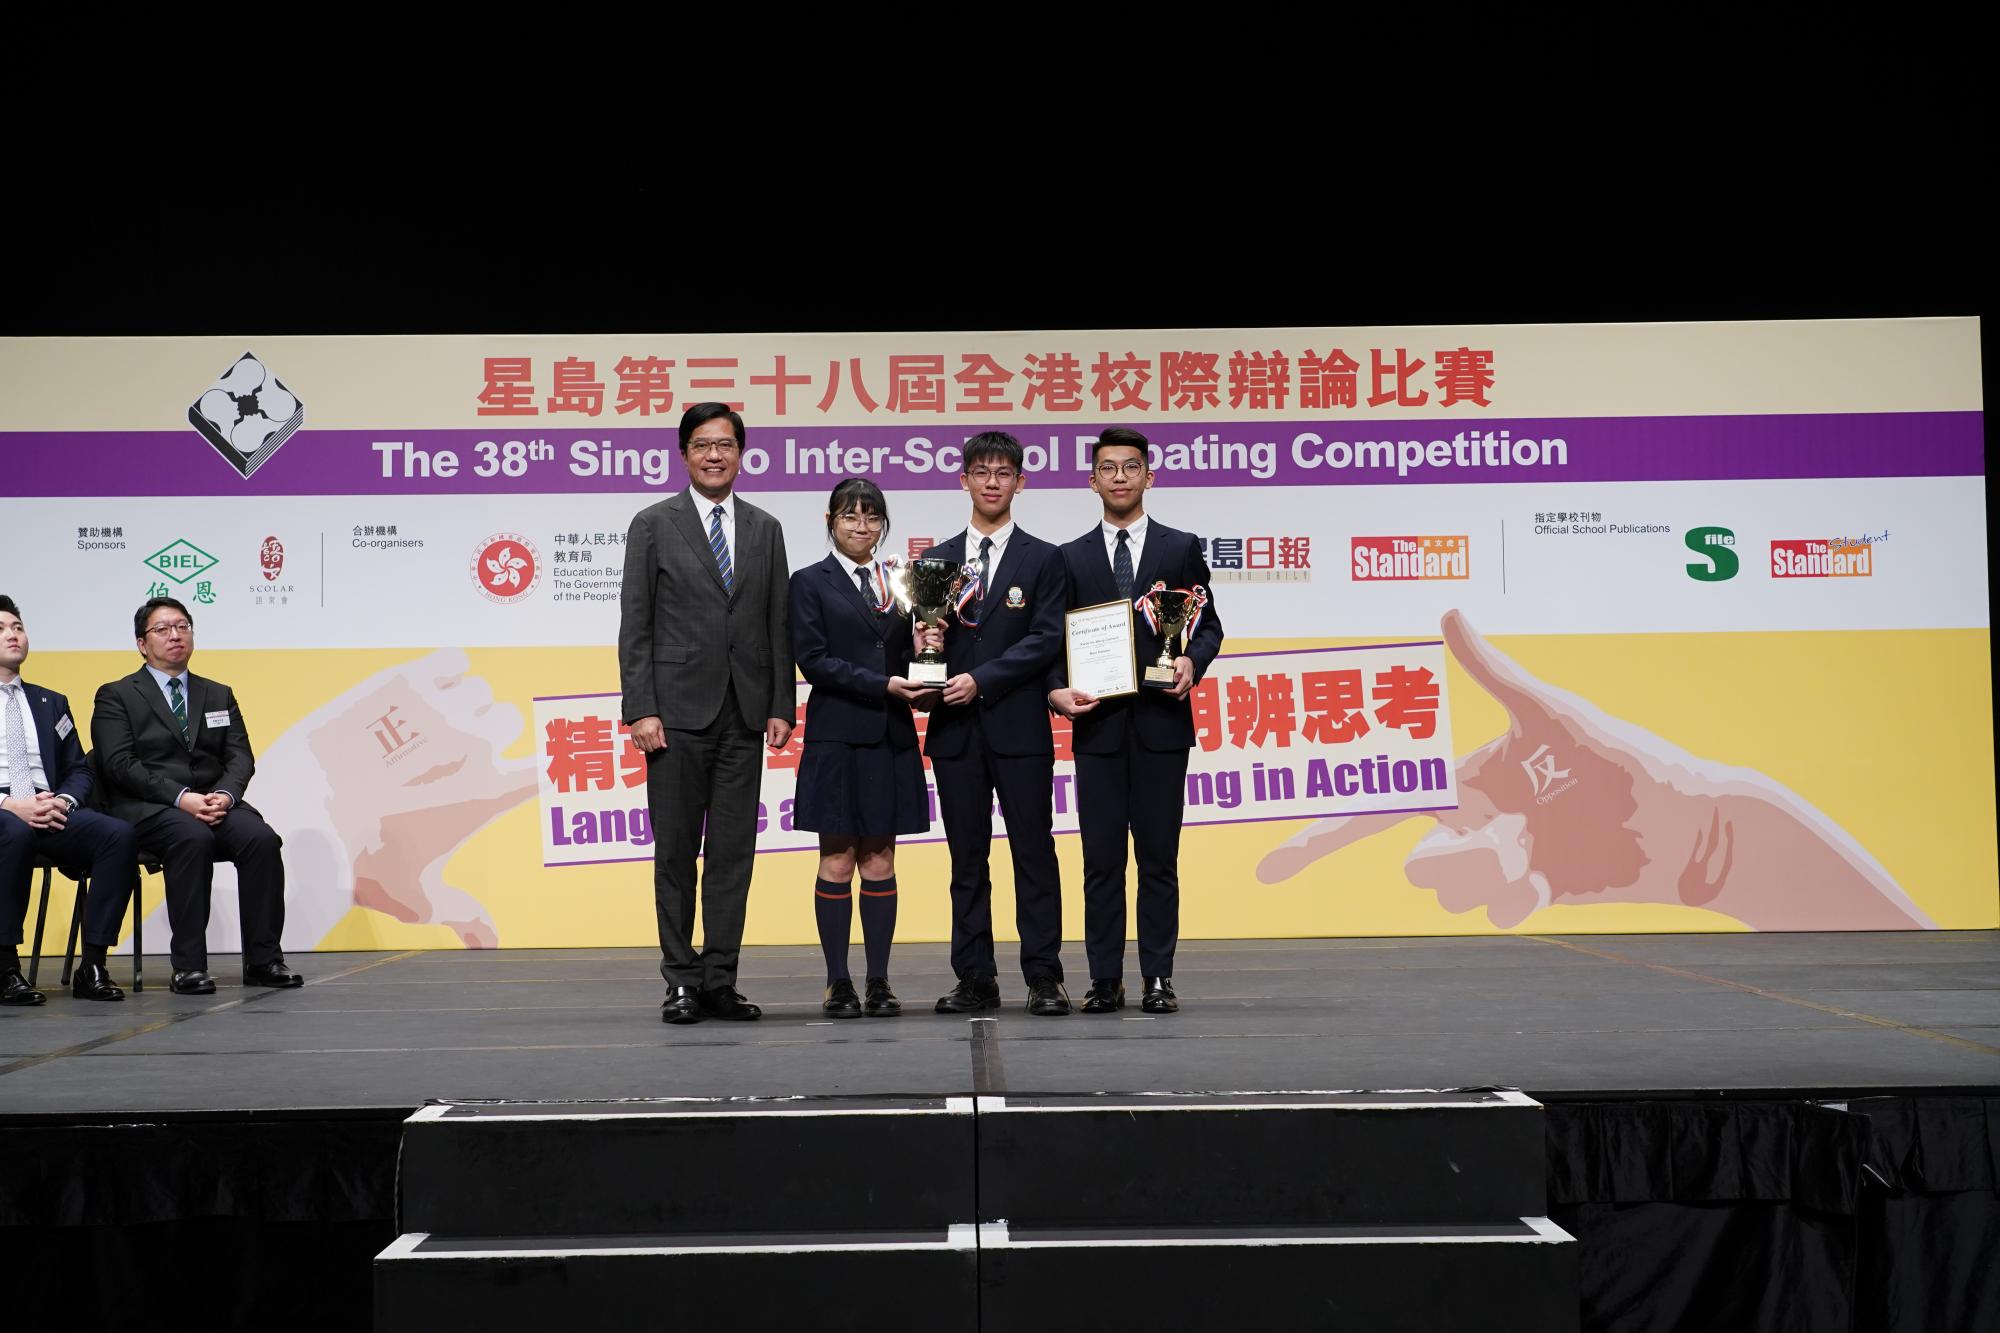 Our students were crowned Champion of The 37th & 38th Sing Tao Inter-School Debating Competition (English Section) two years in a row.